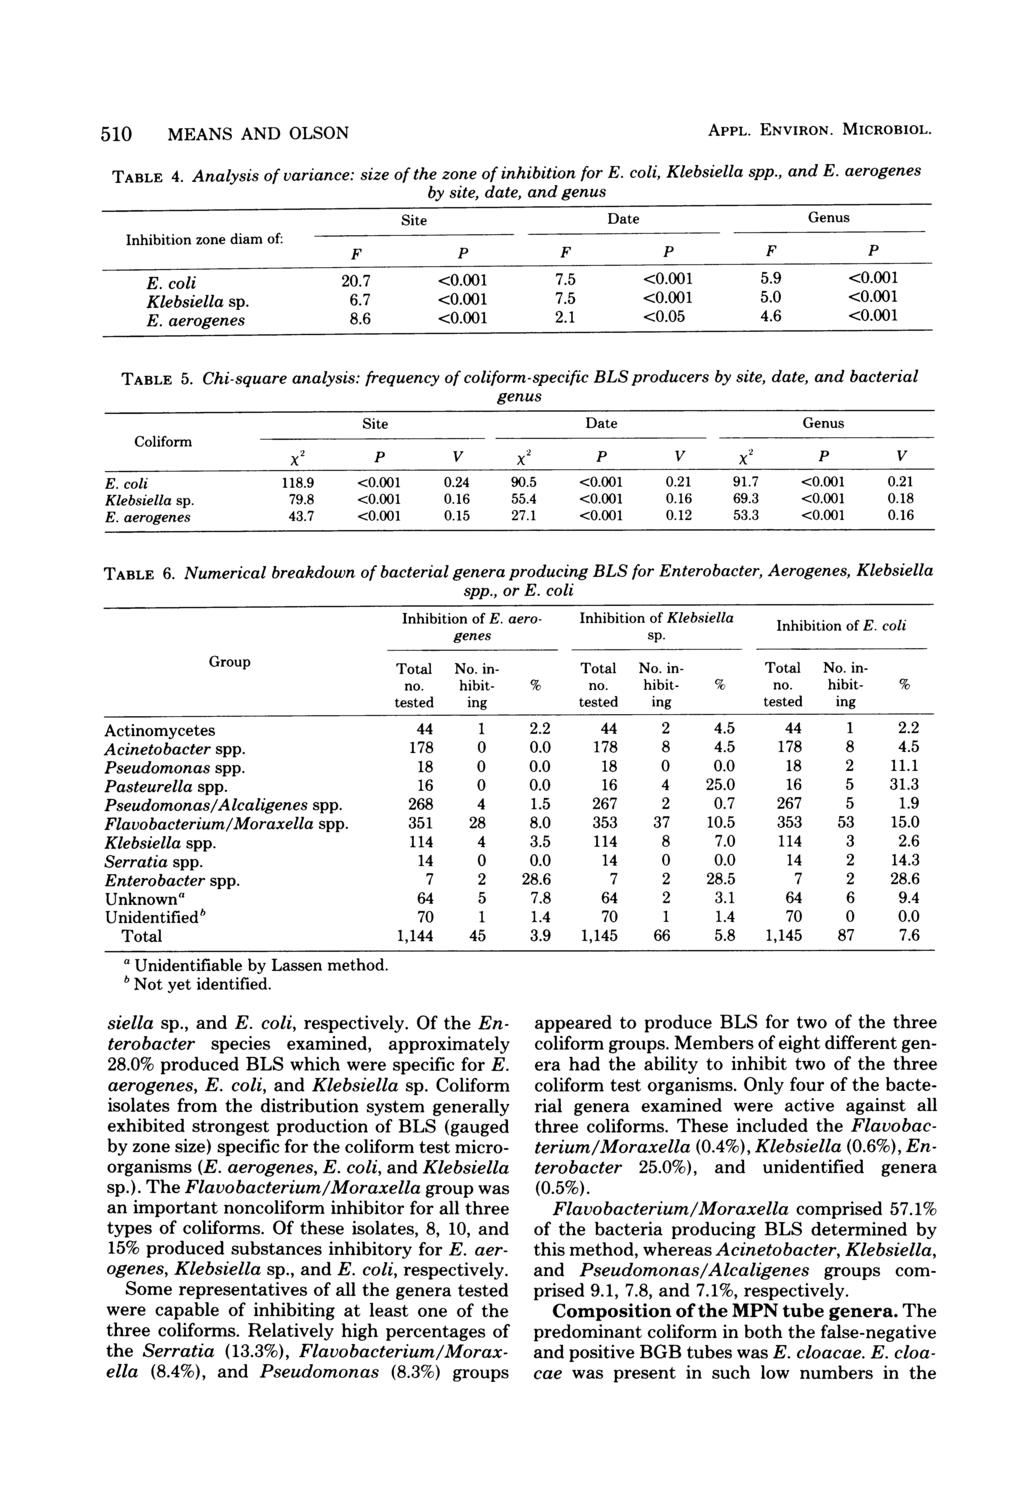 510 MEANS AND OLSON TABLE 4. Analysis of variance: size of the zone of inhibition for E. coli, Klebsiella spp., and E.